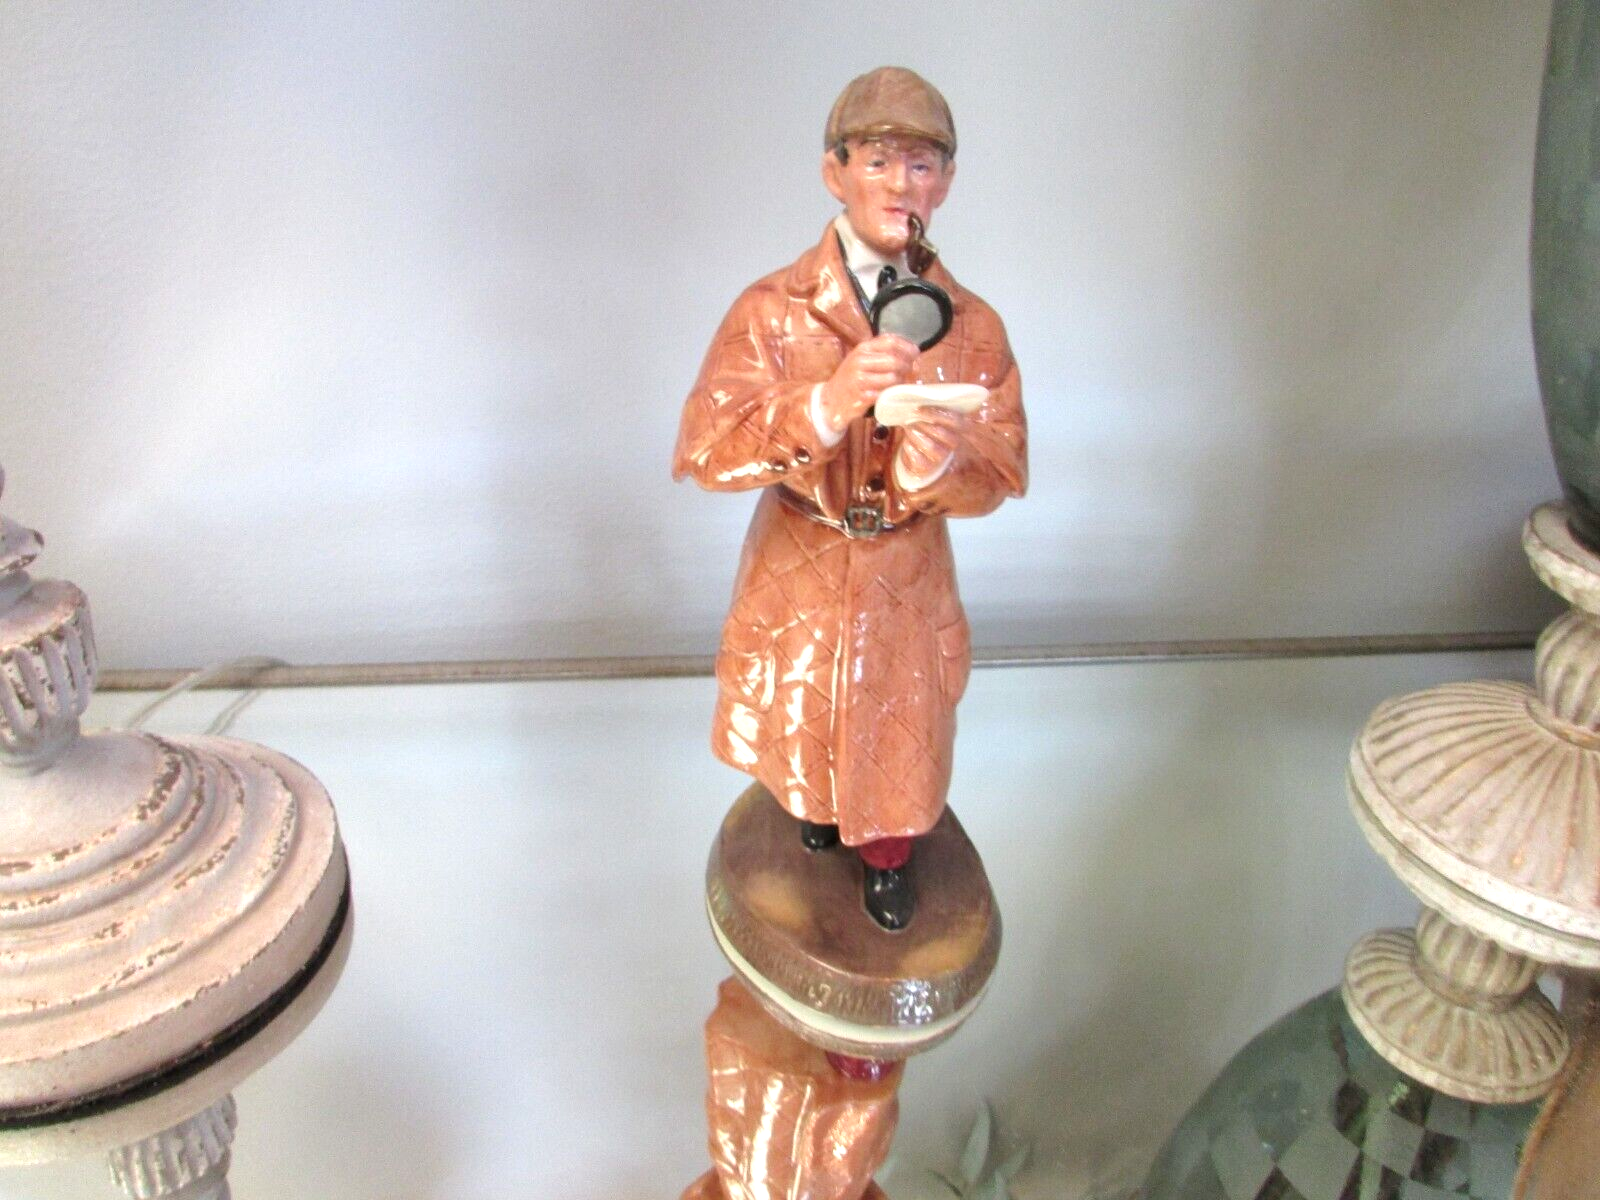 Primary image for ROYAL DOULTON HN 2359 THE DETECTIVE FIGURINE 1976 ENGLAND 9.25" MINT